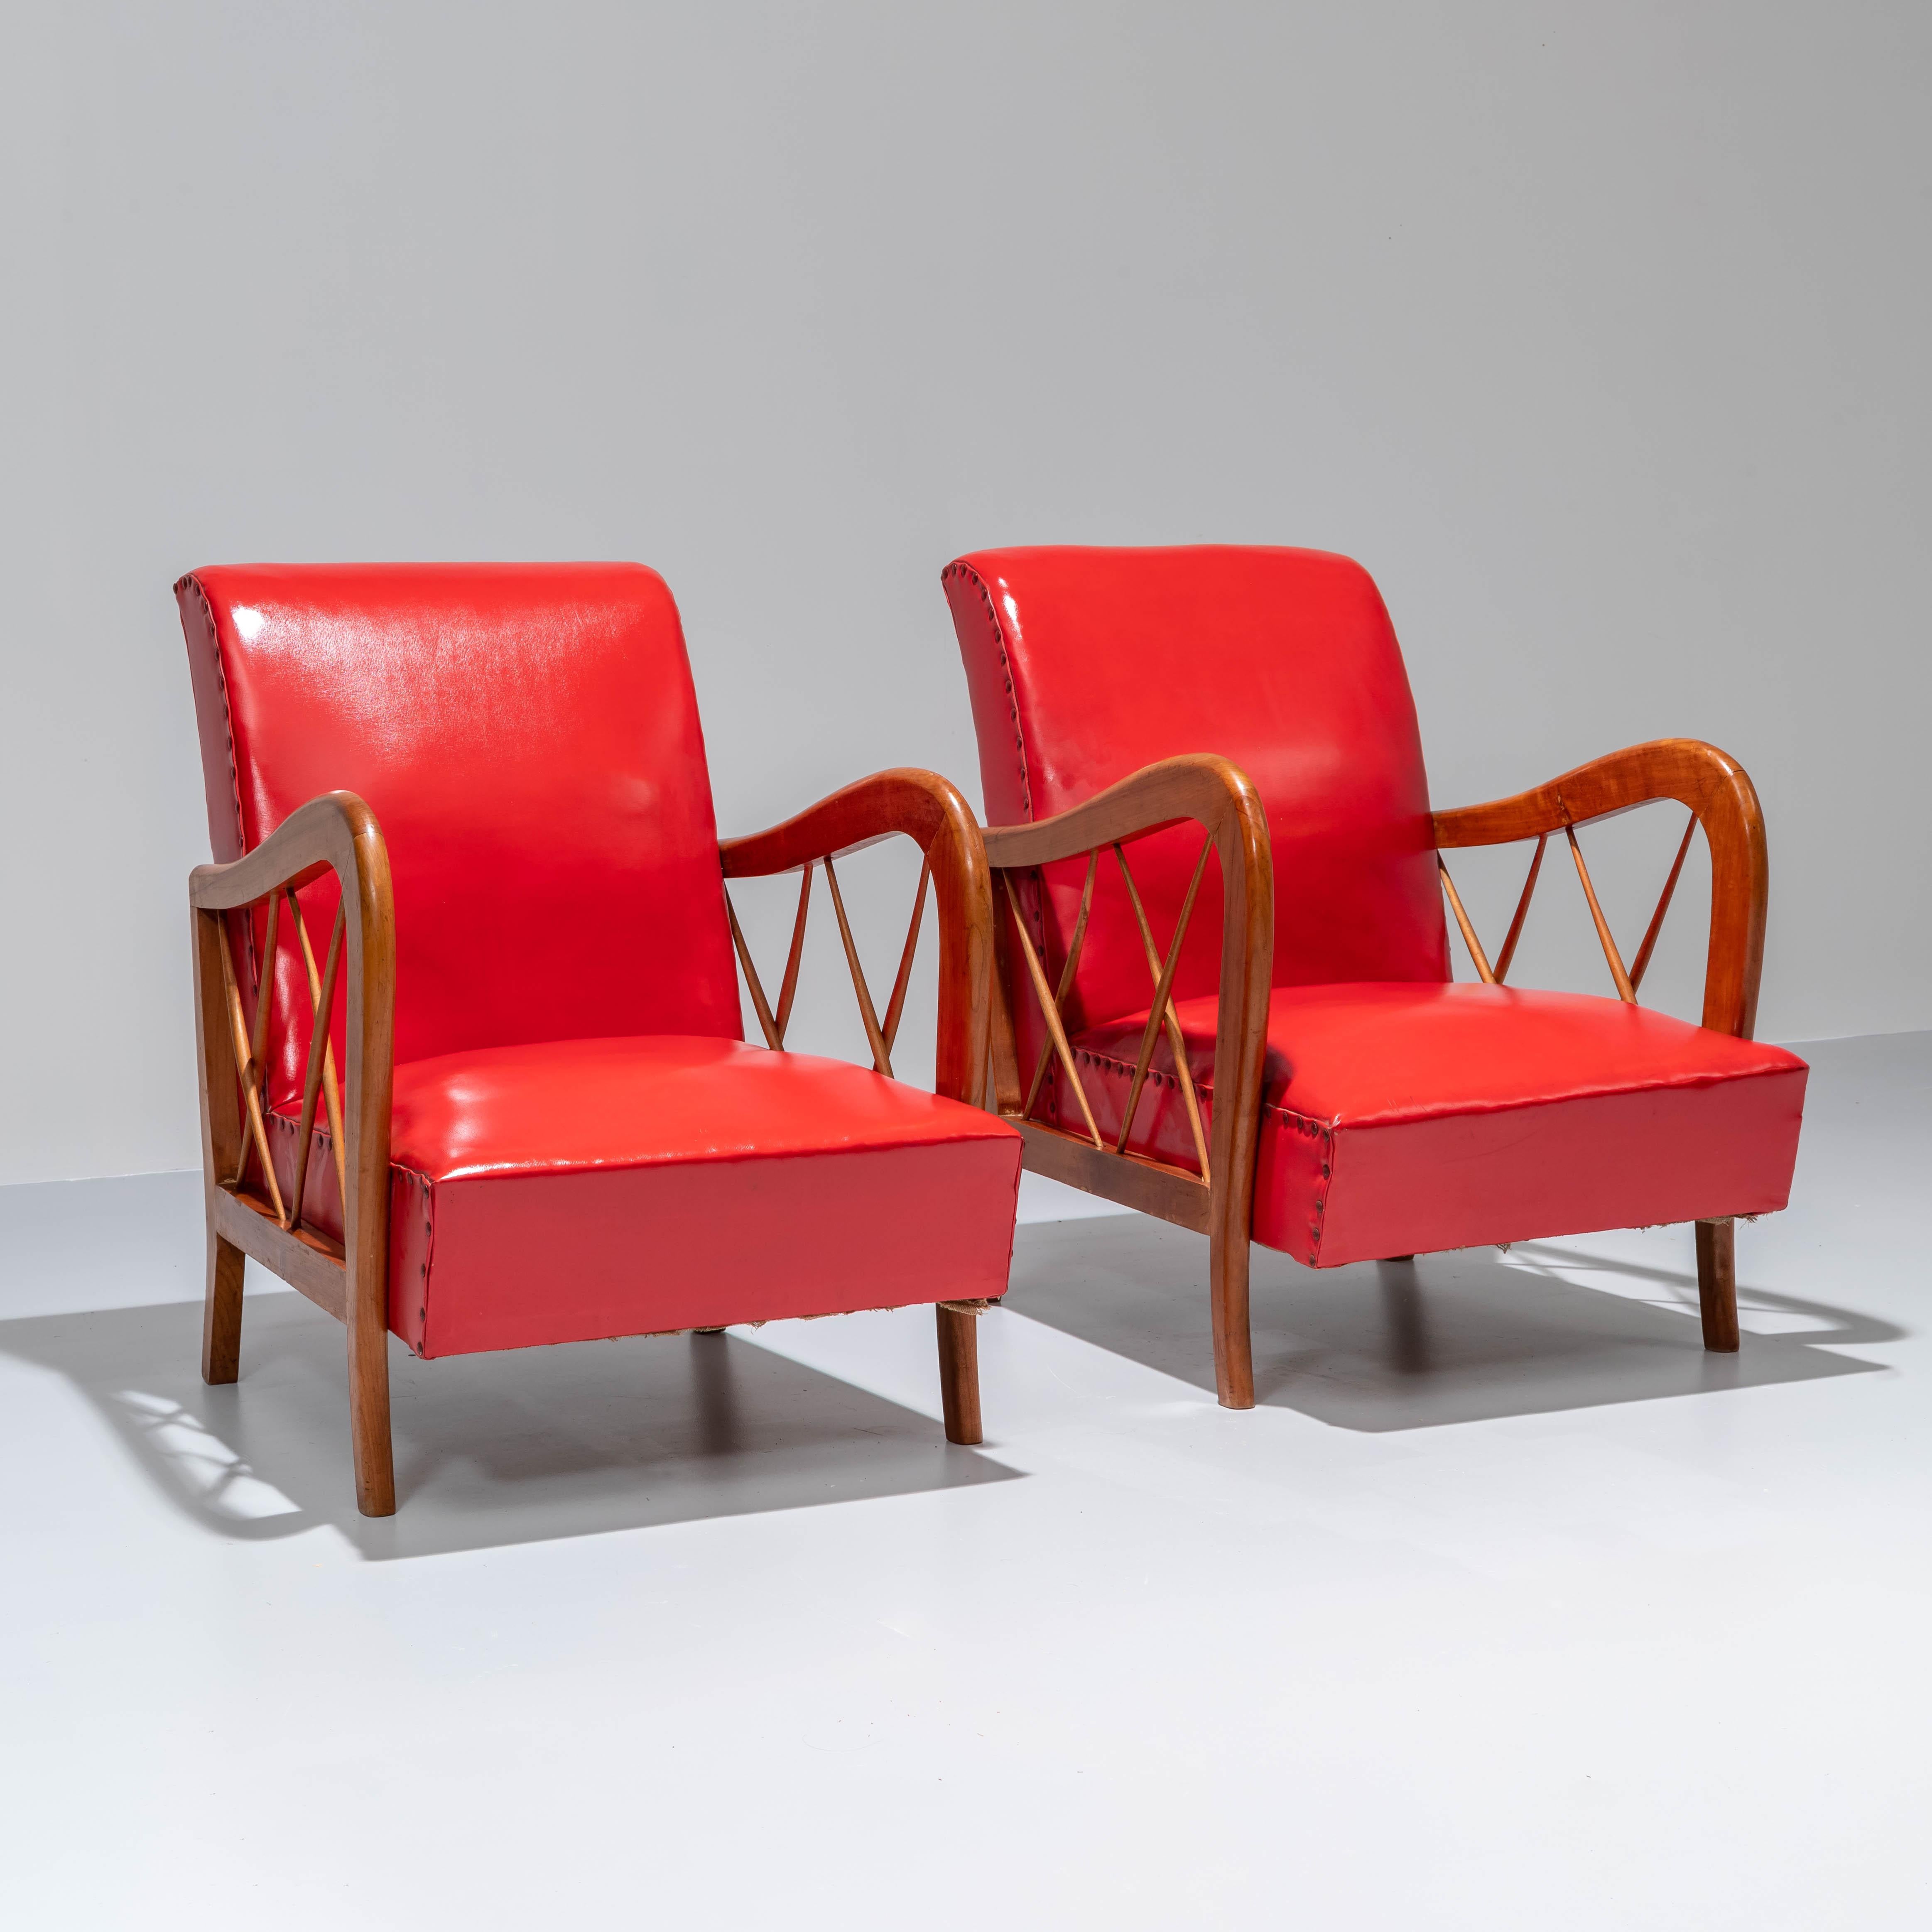 Italian Set of 2 Arm Chairs by Paolo Buffa in Wood and Red Leatherette, Italy, 1950's